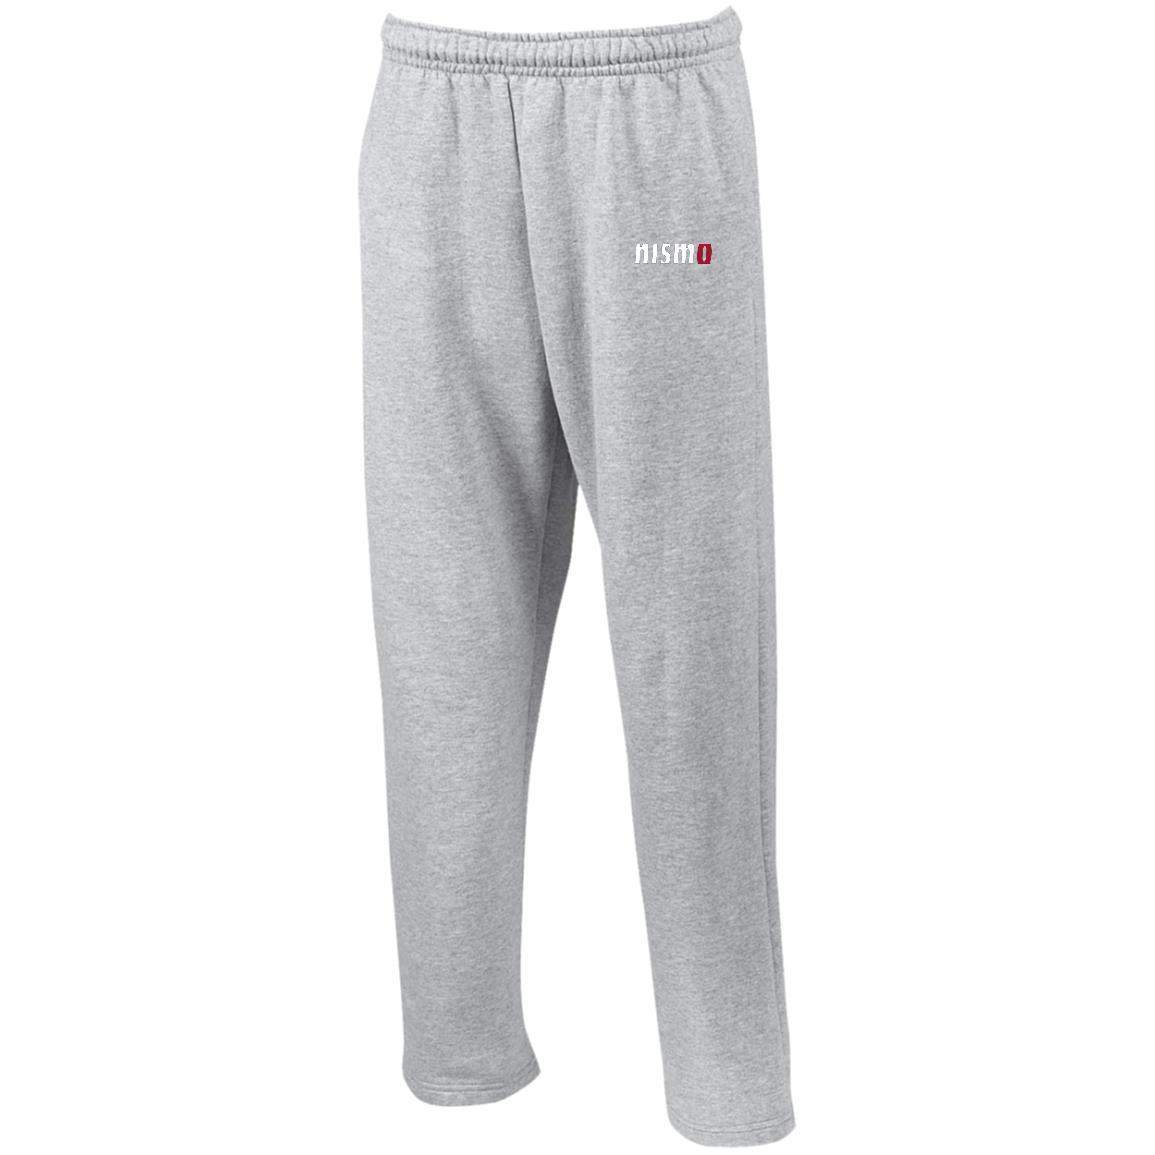 Nismo Open Bottom Sweatpants with Pockets - My Car My Rules